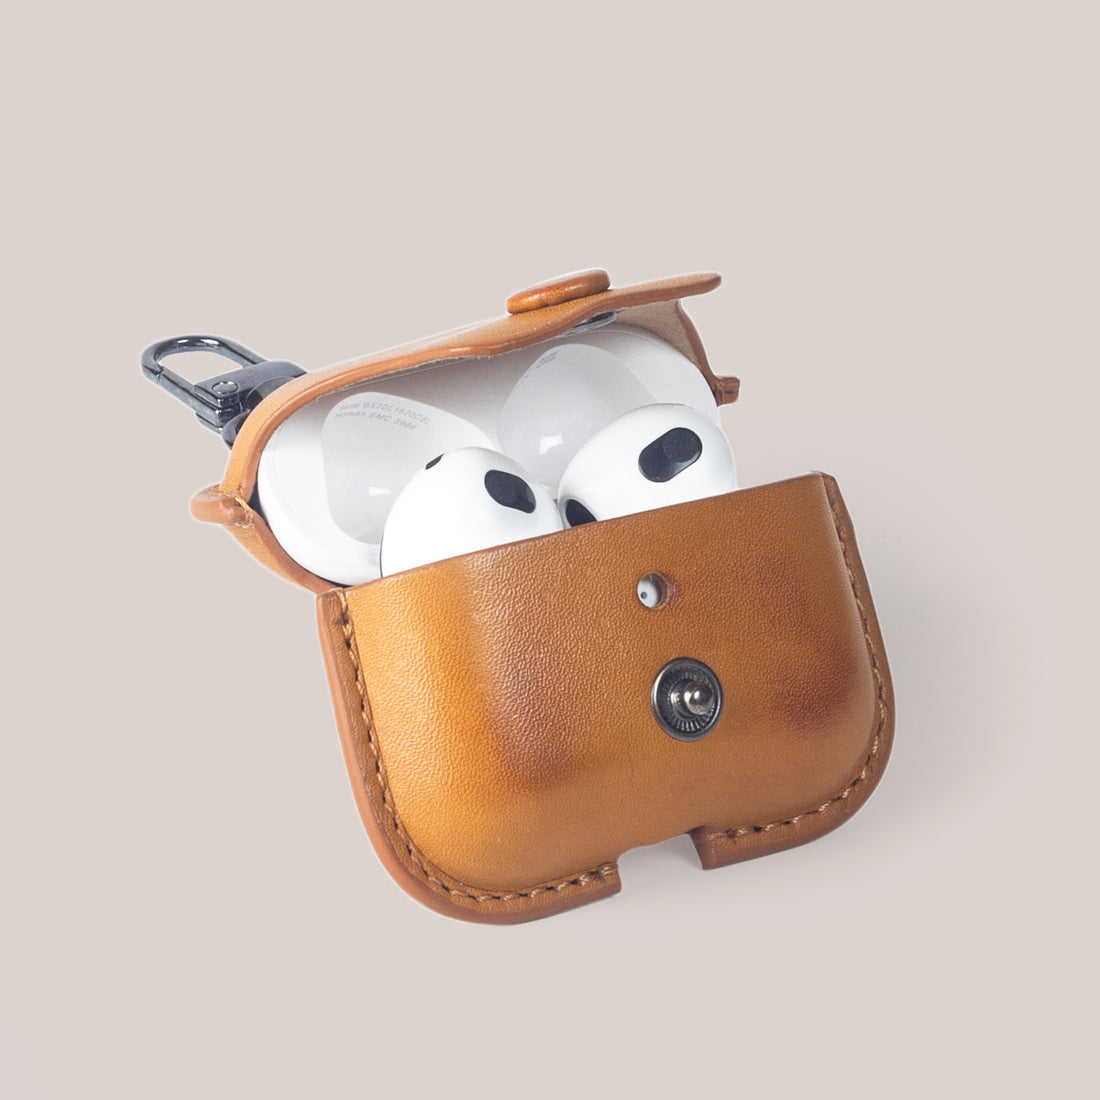 Leather AirPods 3 - Vintage Tan